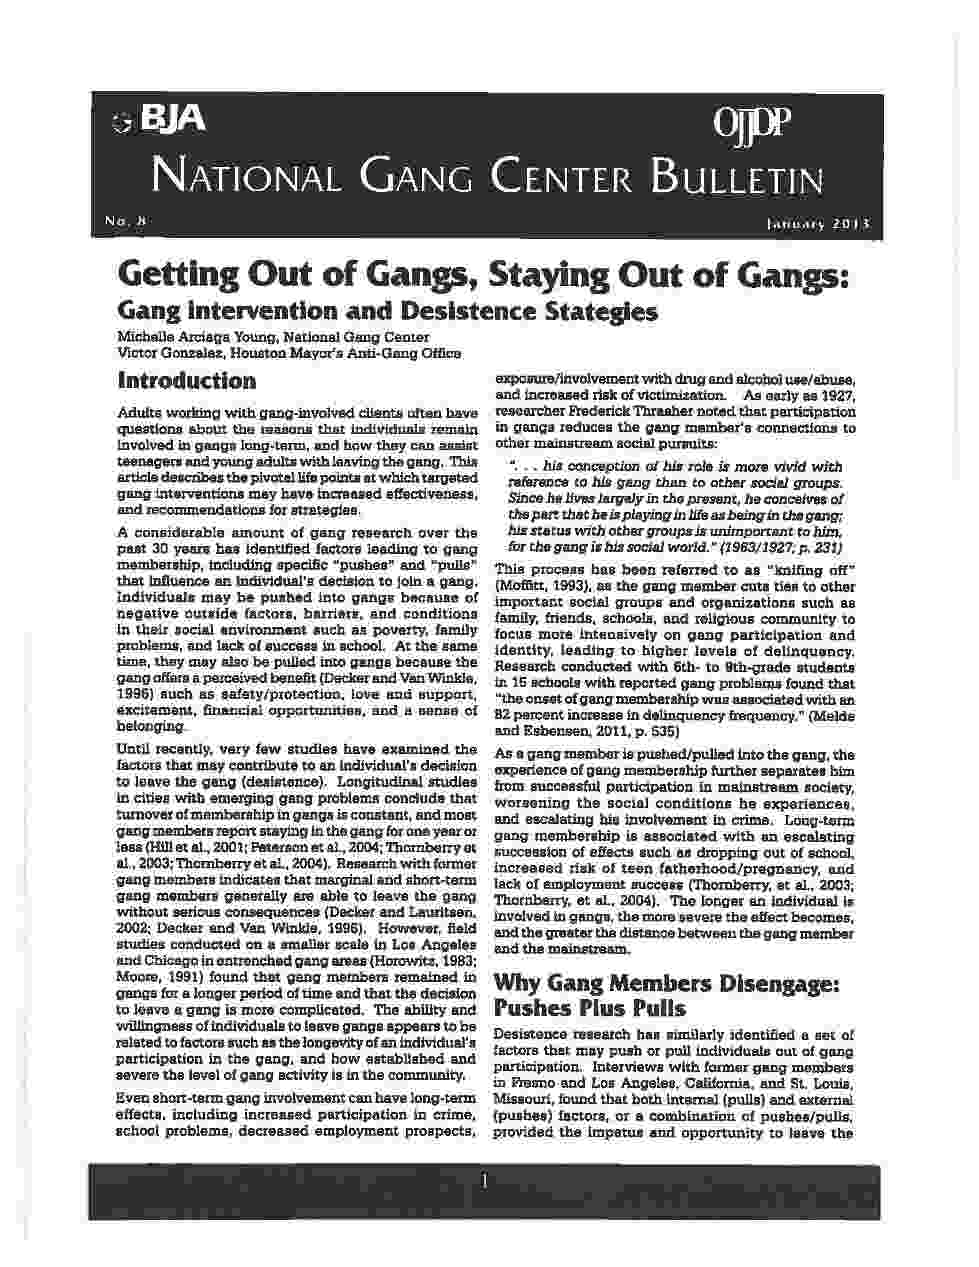 research articles about gangs